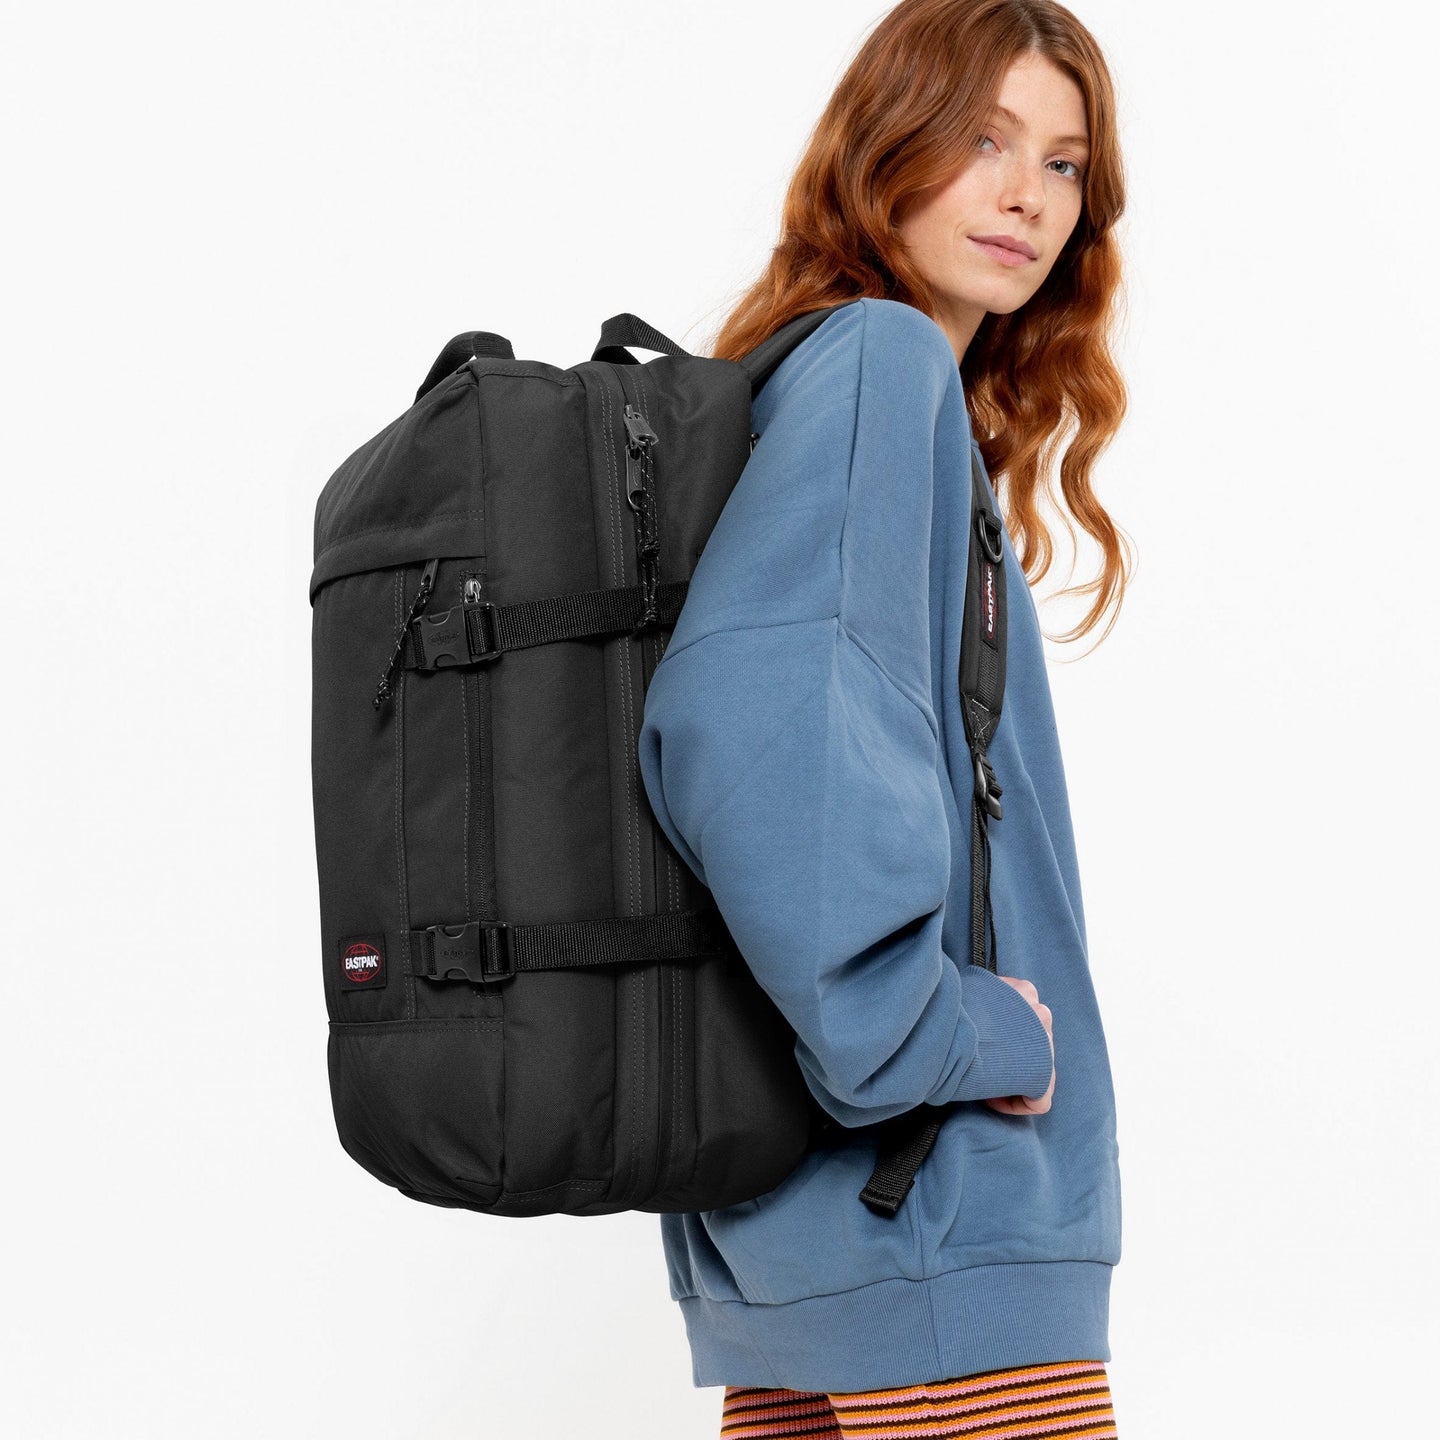  Travelpack - Black - with female model